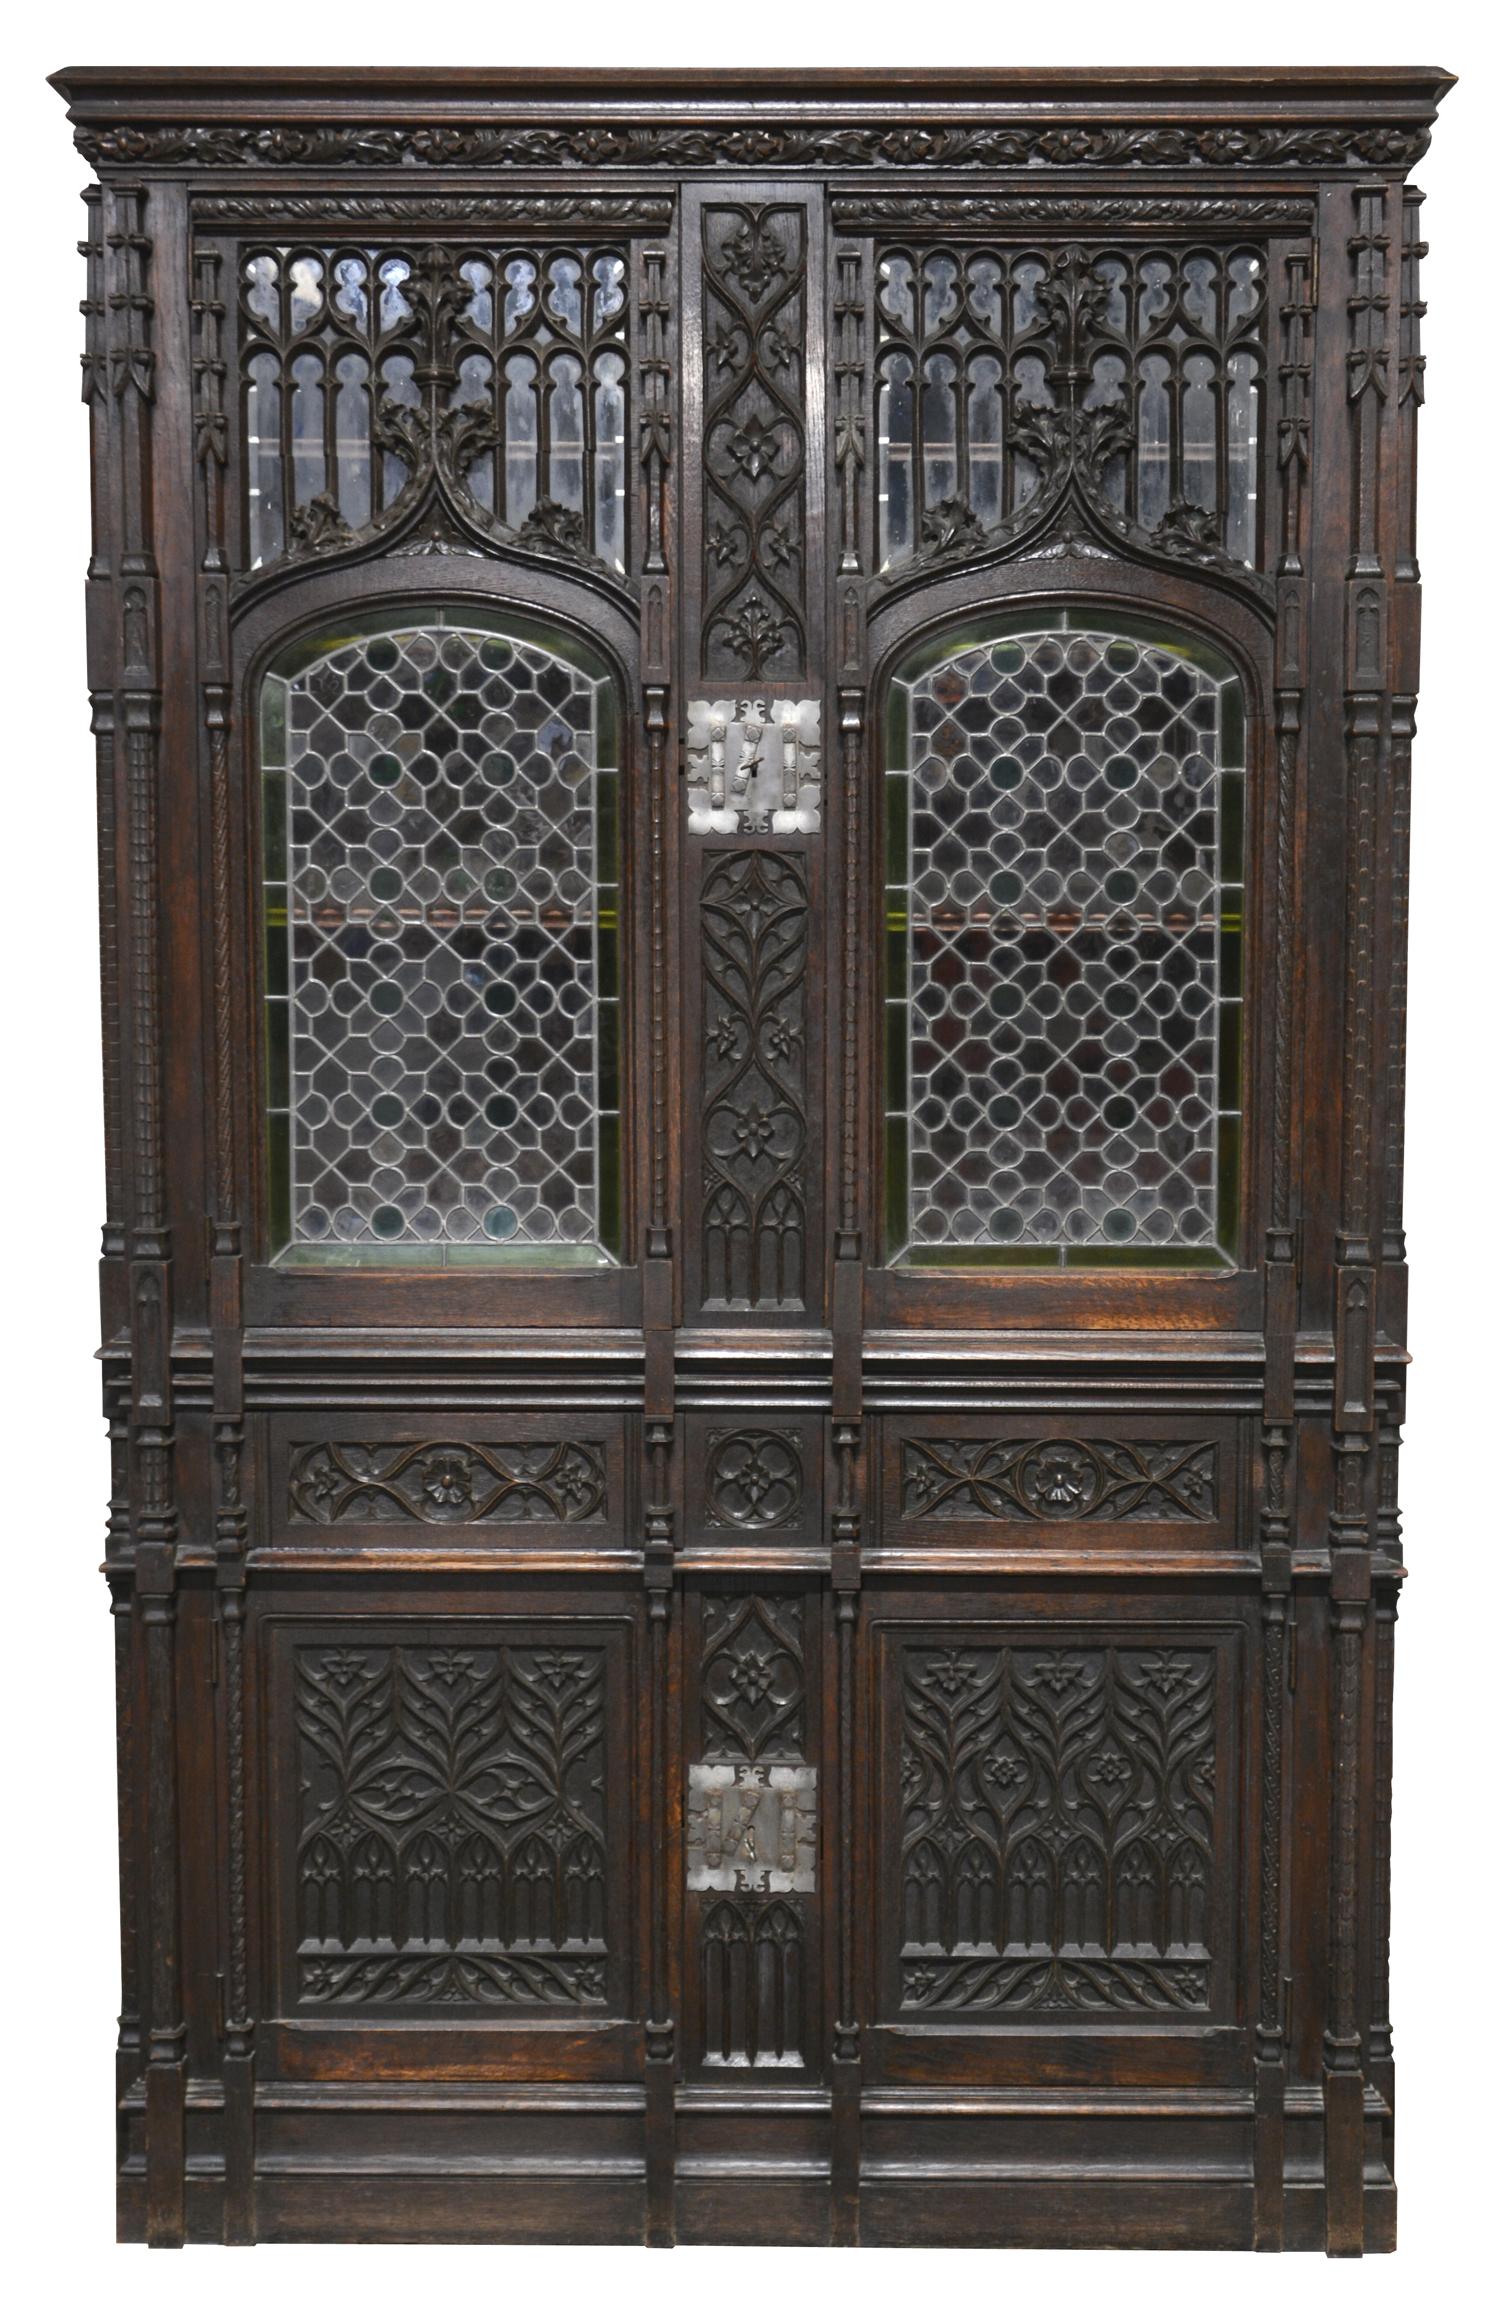 An amazing 19th century amazing Gothic Revival bookcase in the spirit of Violet-Le-Duc.

Like a Gothic Cathedral! This gorgeous oak bookcase is finely carved with Gothic patterns. Two leaded and stained doors, 2 drawers and 2 carved doors at the